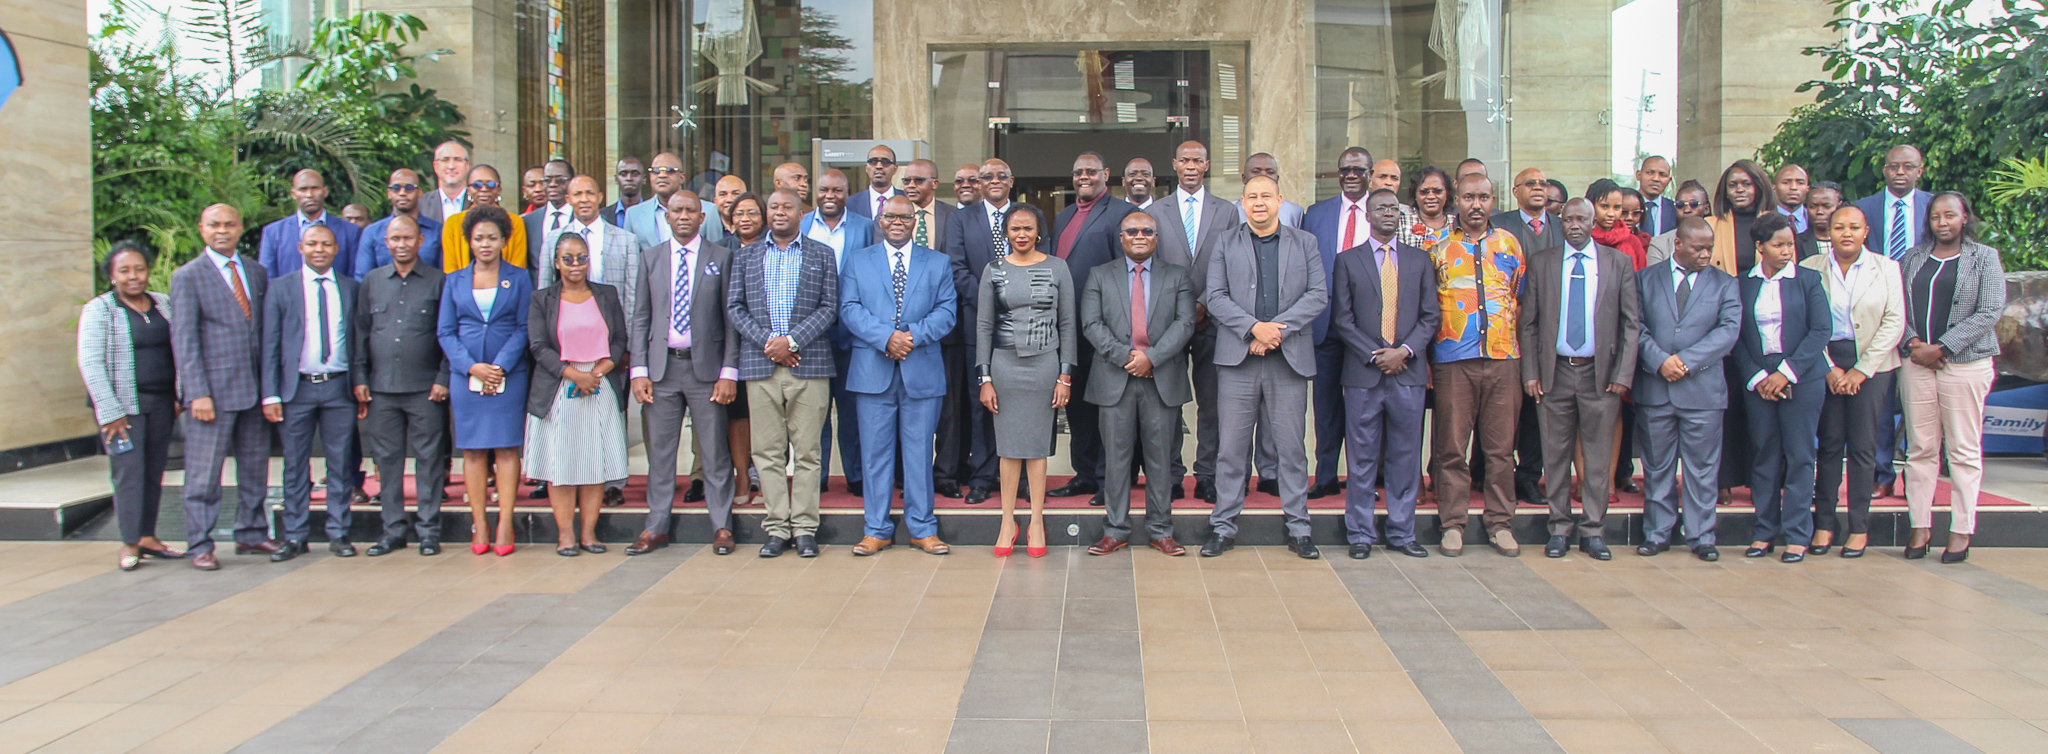 Principal Secretary, Wildlife, Ms. Silvia Museiya posing a photo with delegates during the Extraordinary meeting of the 13th Lusaka Agreement Governing Council.